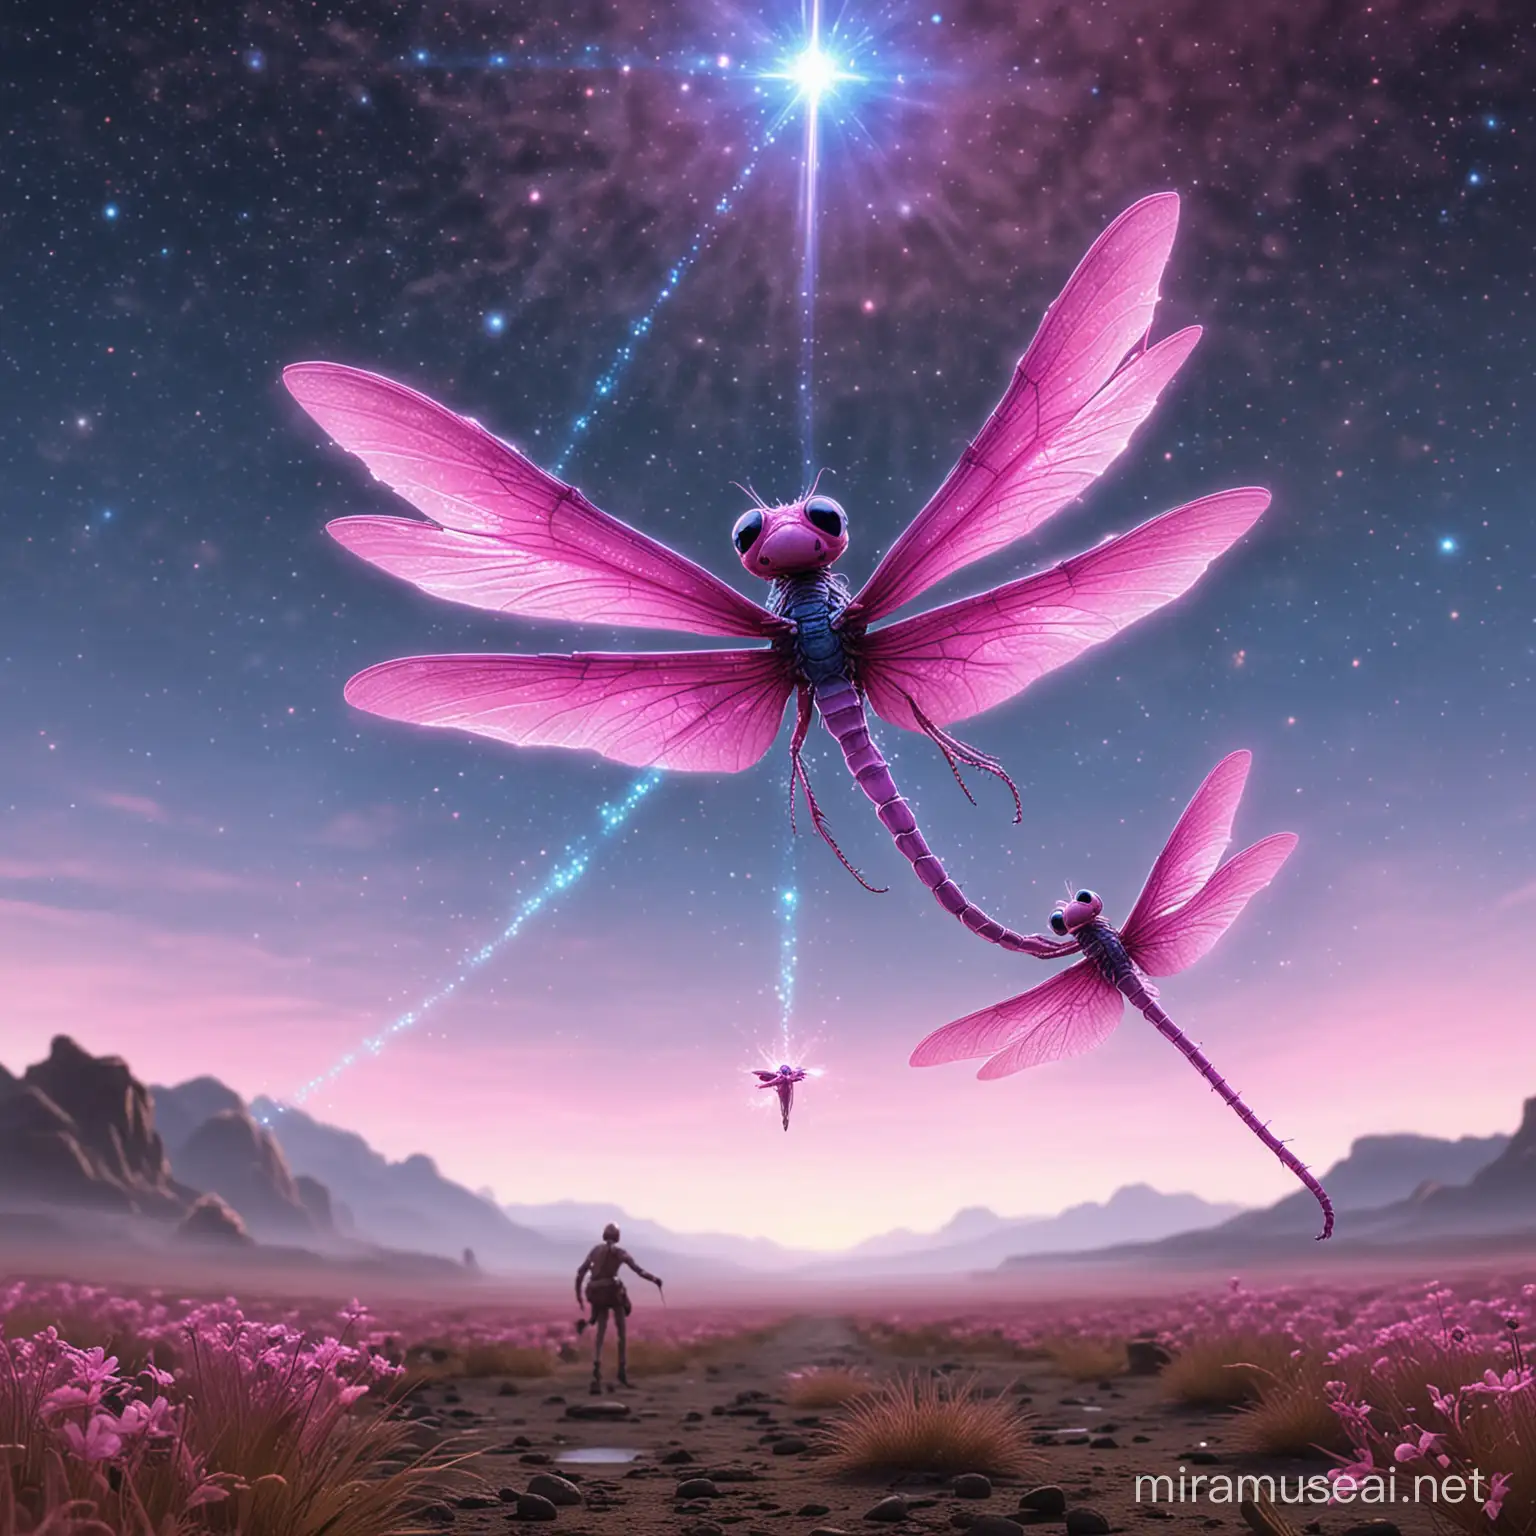 Pink Alien Dragon Flying with Blue Star Trail and Pursuer in Distance